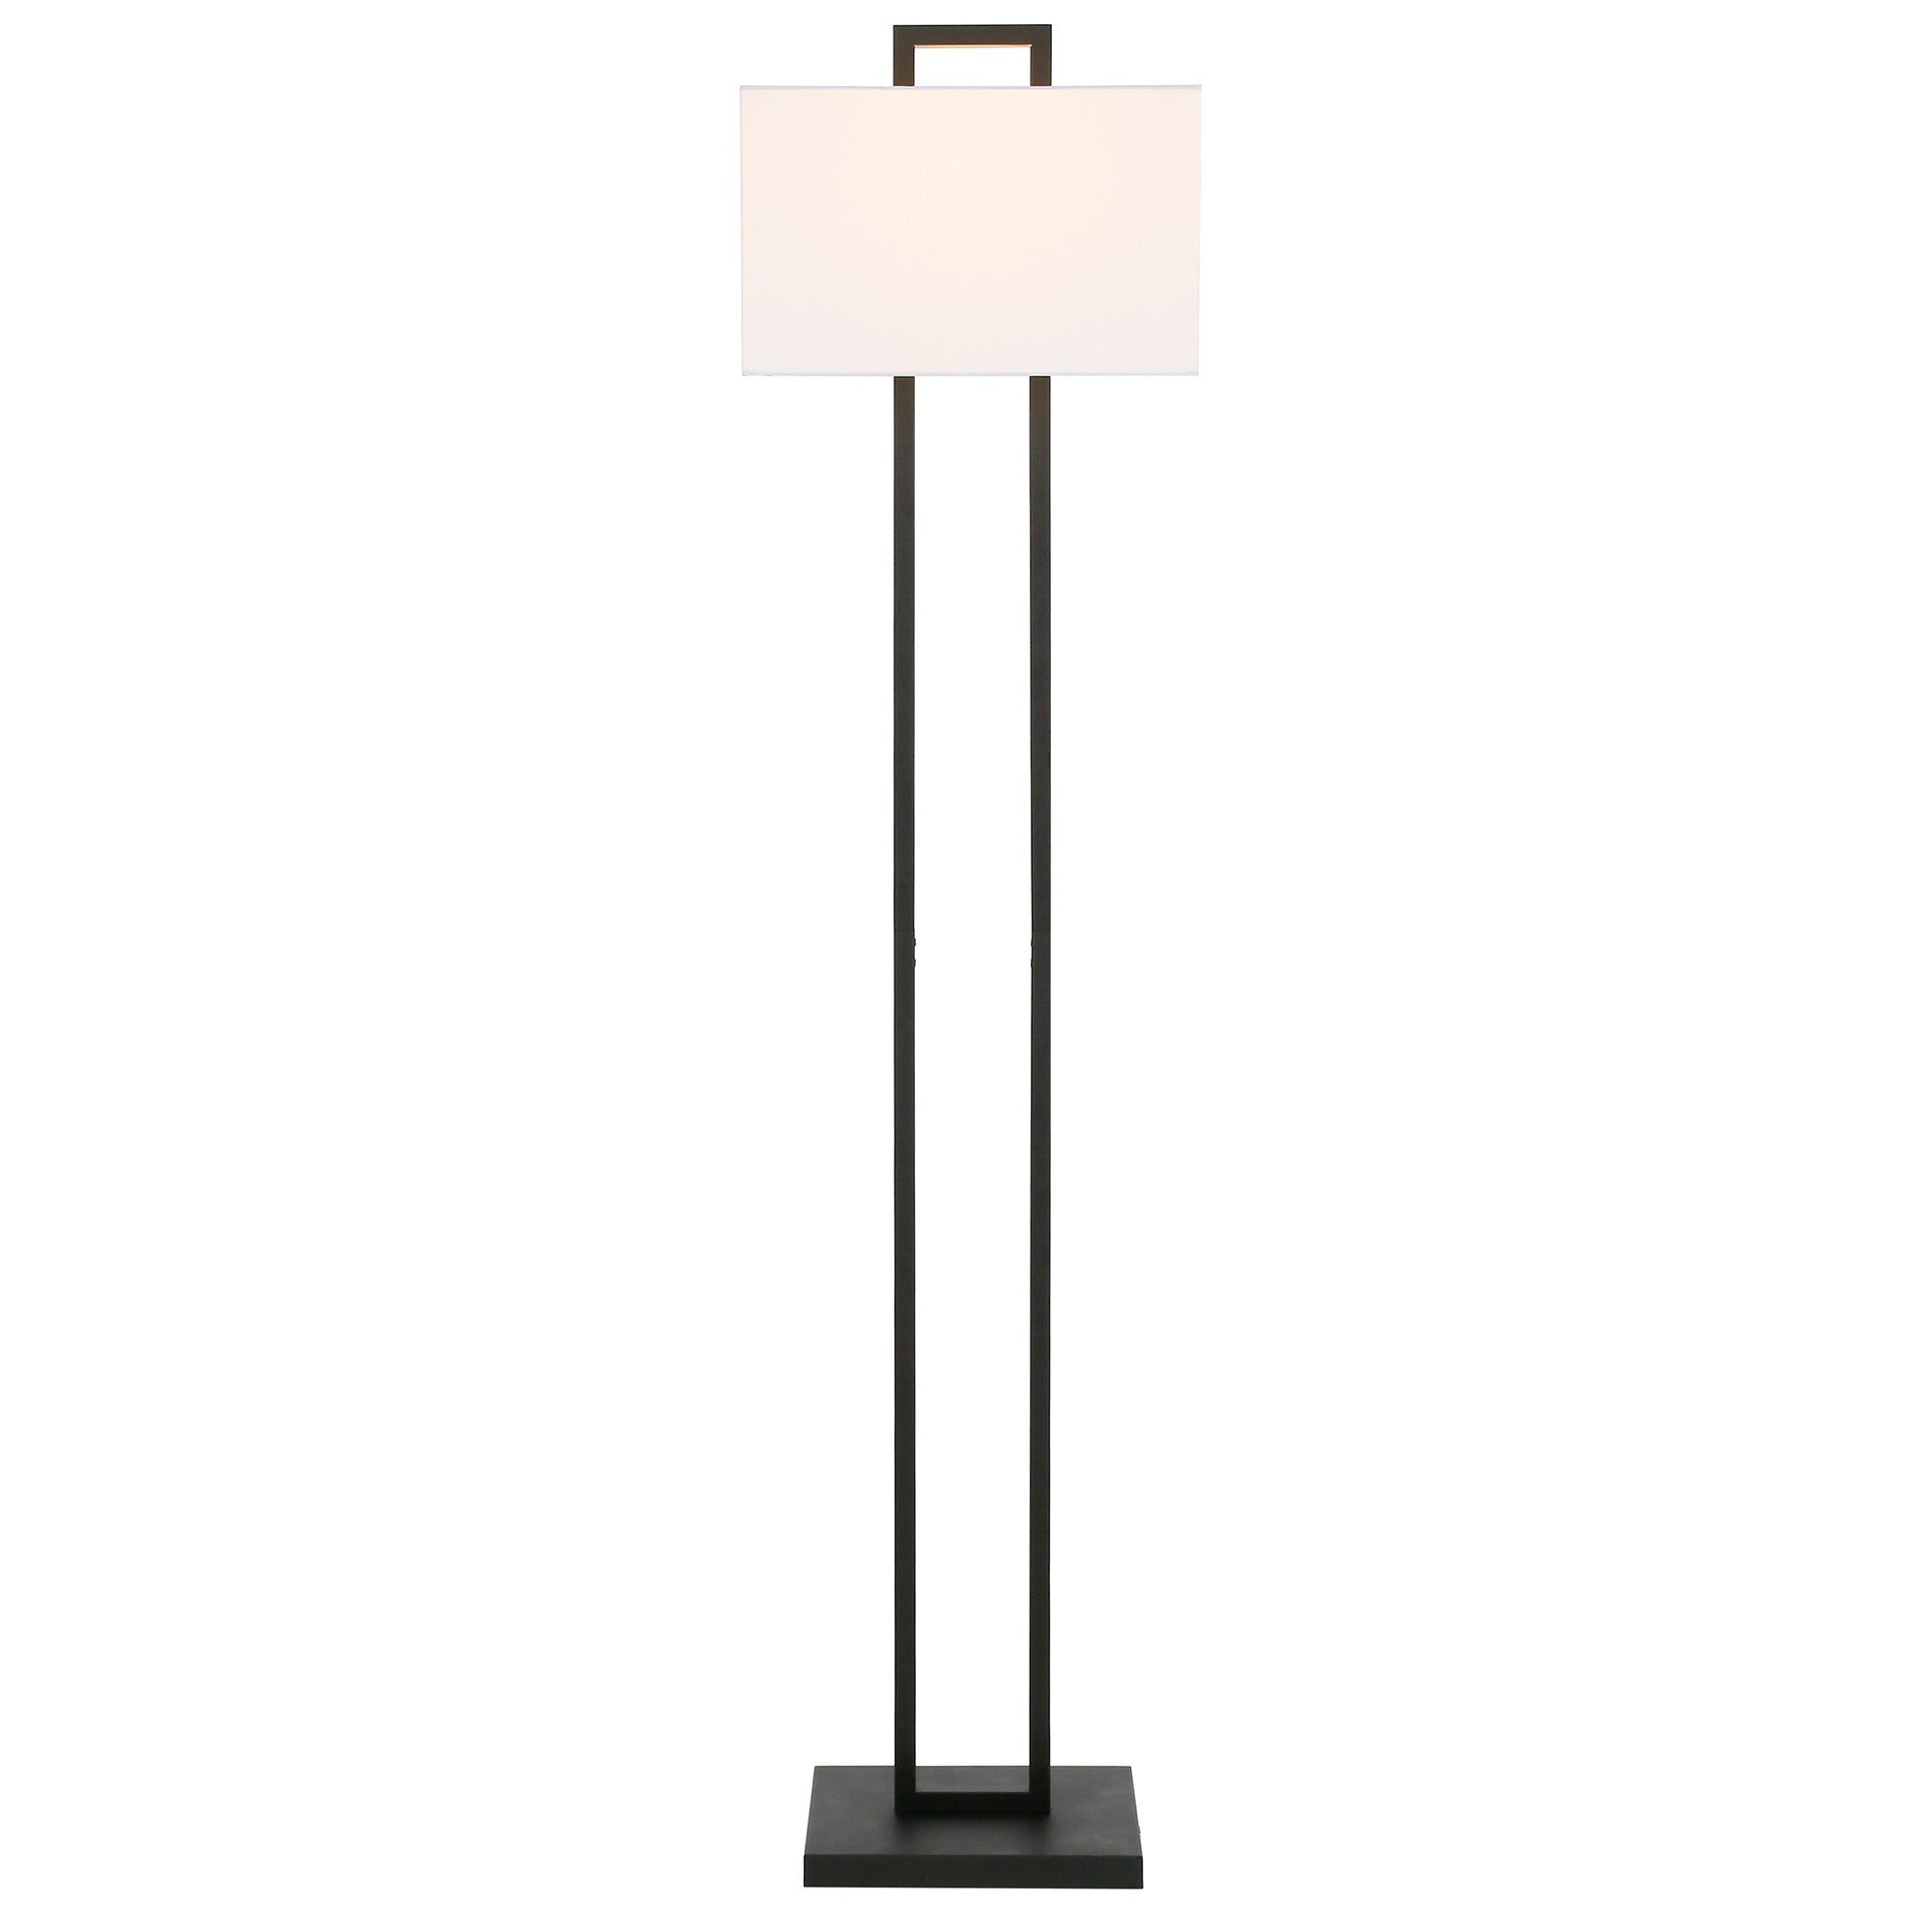 68" Black Traditional Shaped Floor Lamp With White Frosted Glass Rectangular Shade